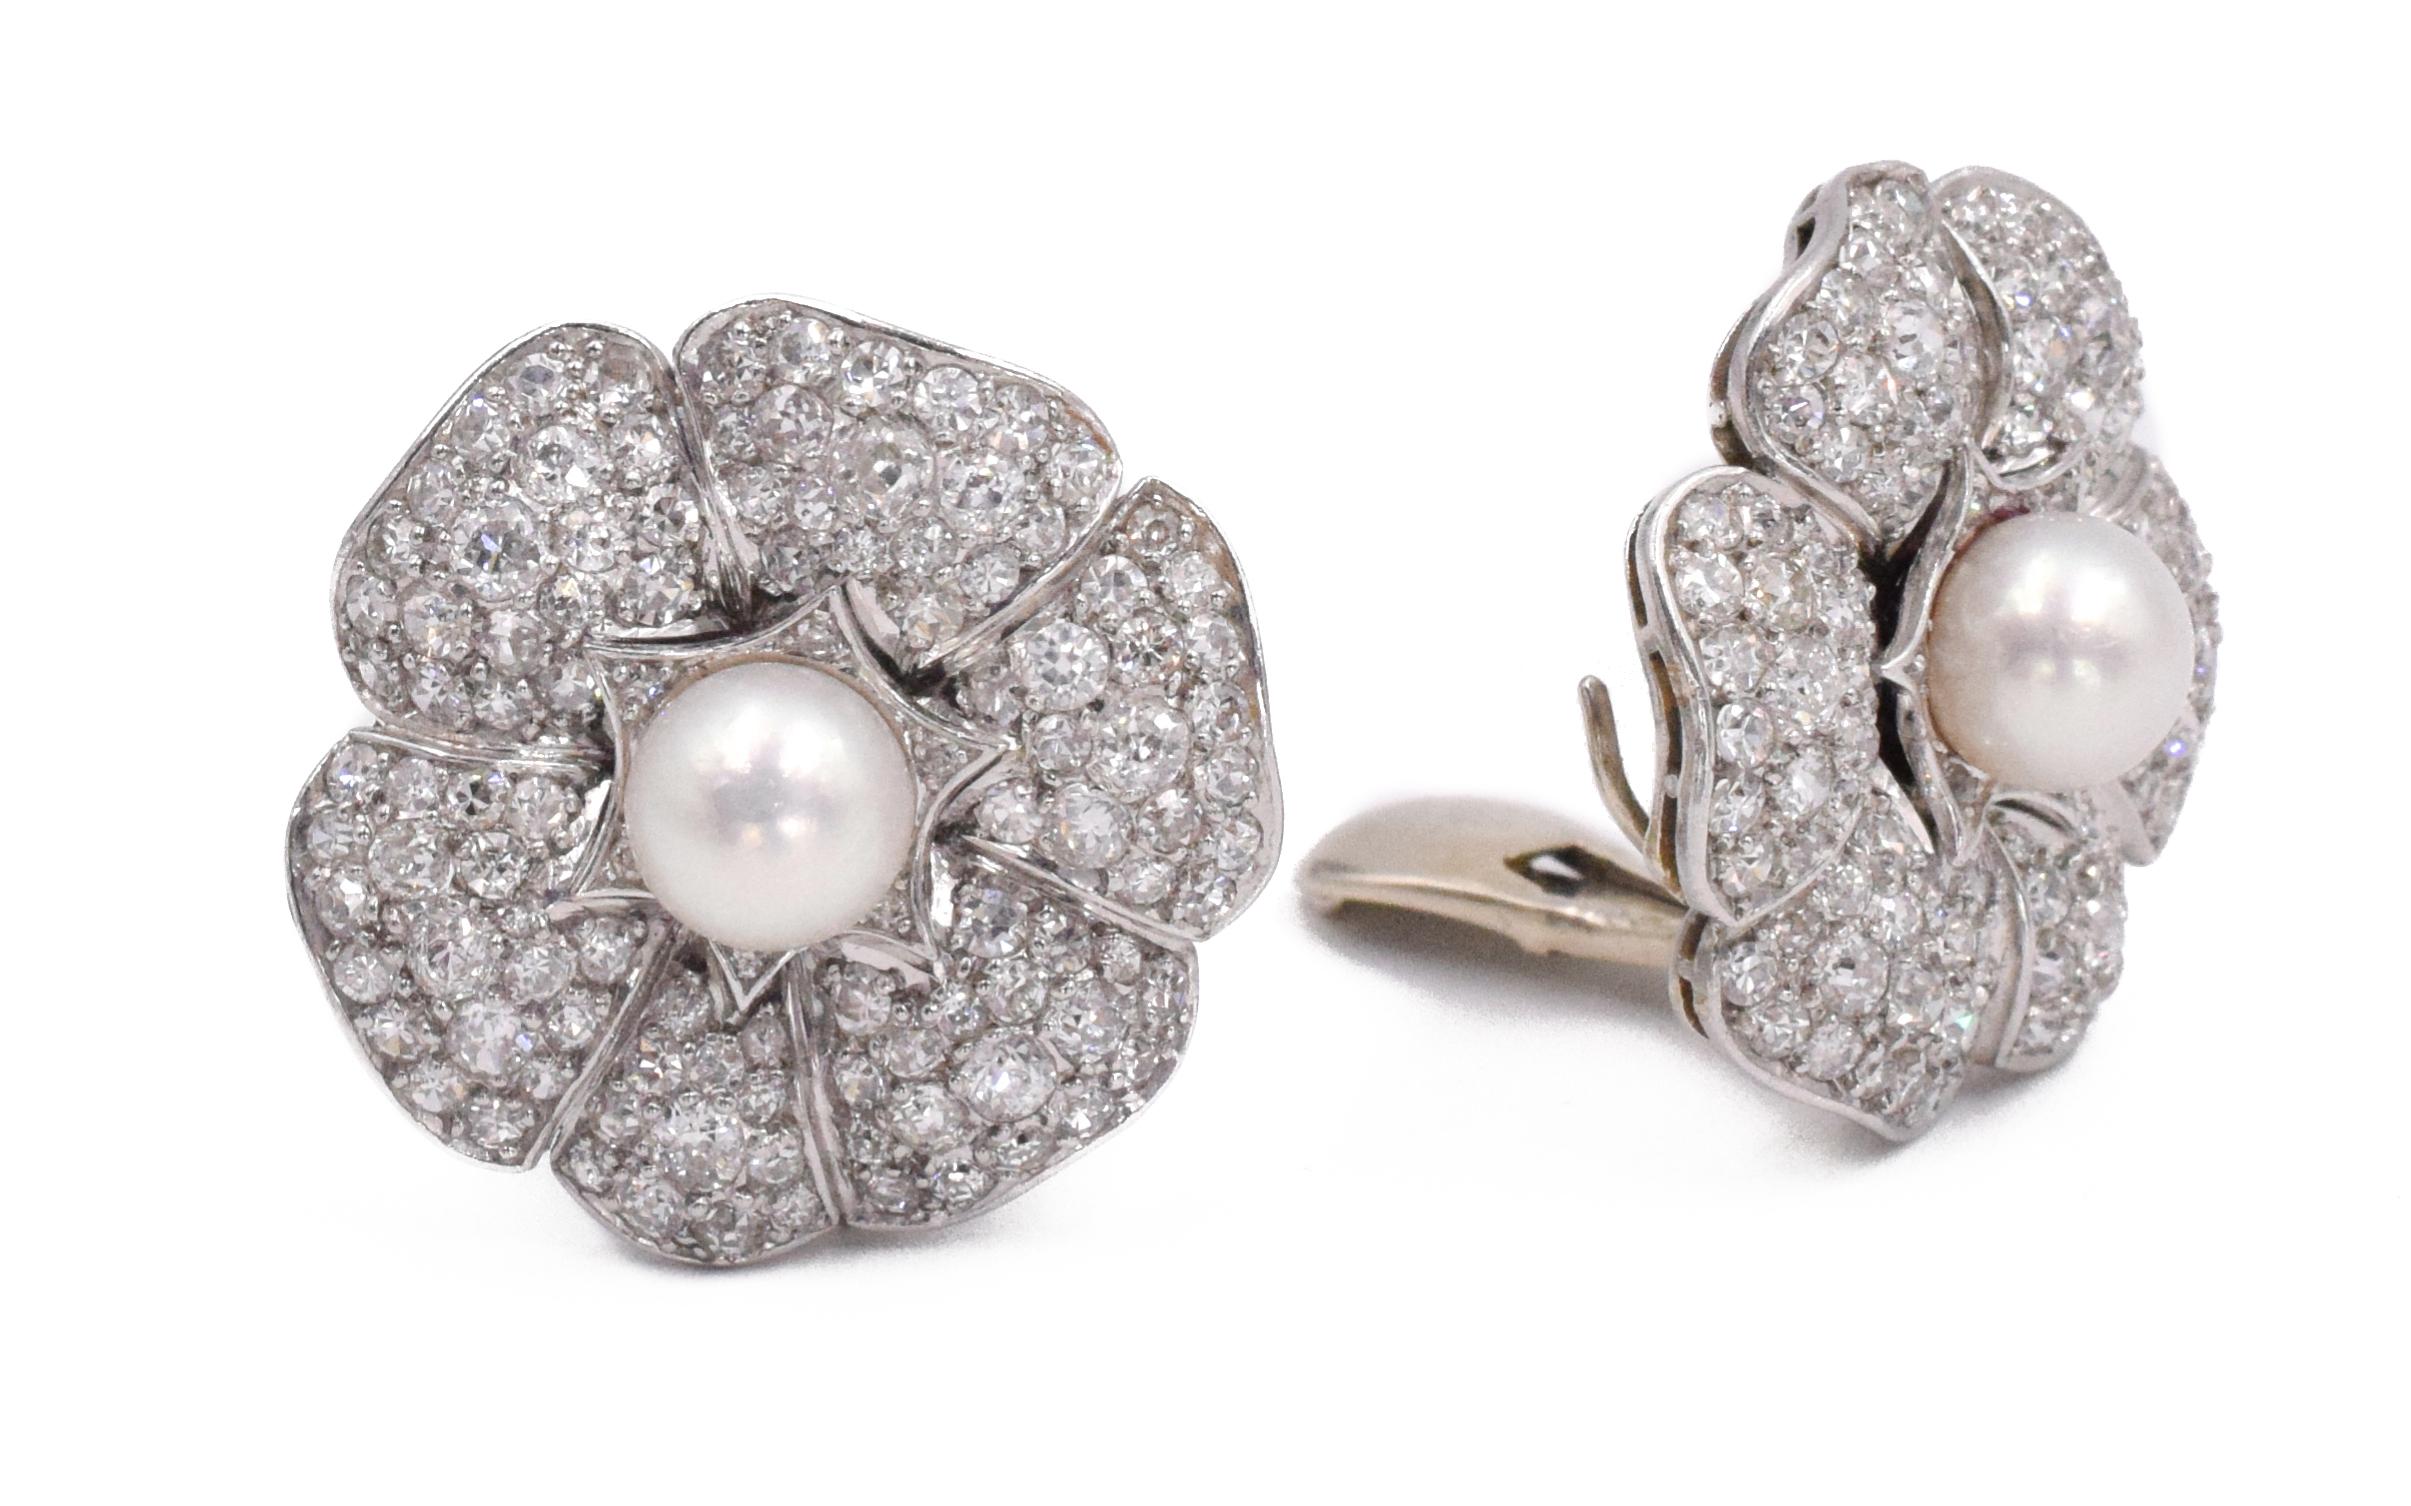  Diamond and Cultured Pearl Earrings This pair of earrings has round diamonds with a tota carat weight of approximately 6ct around 2 center pearls measuring about 7.5mm each, all set in platinum.
 